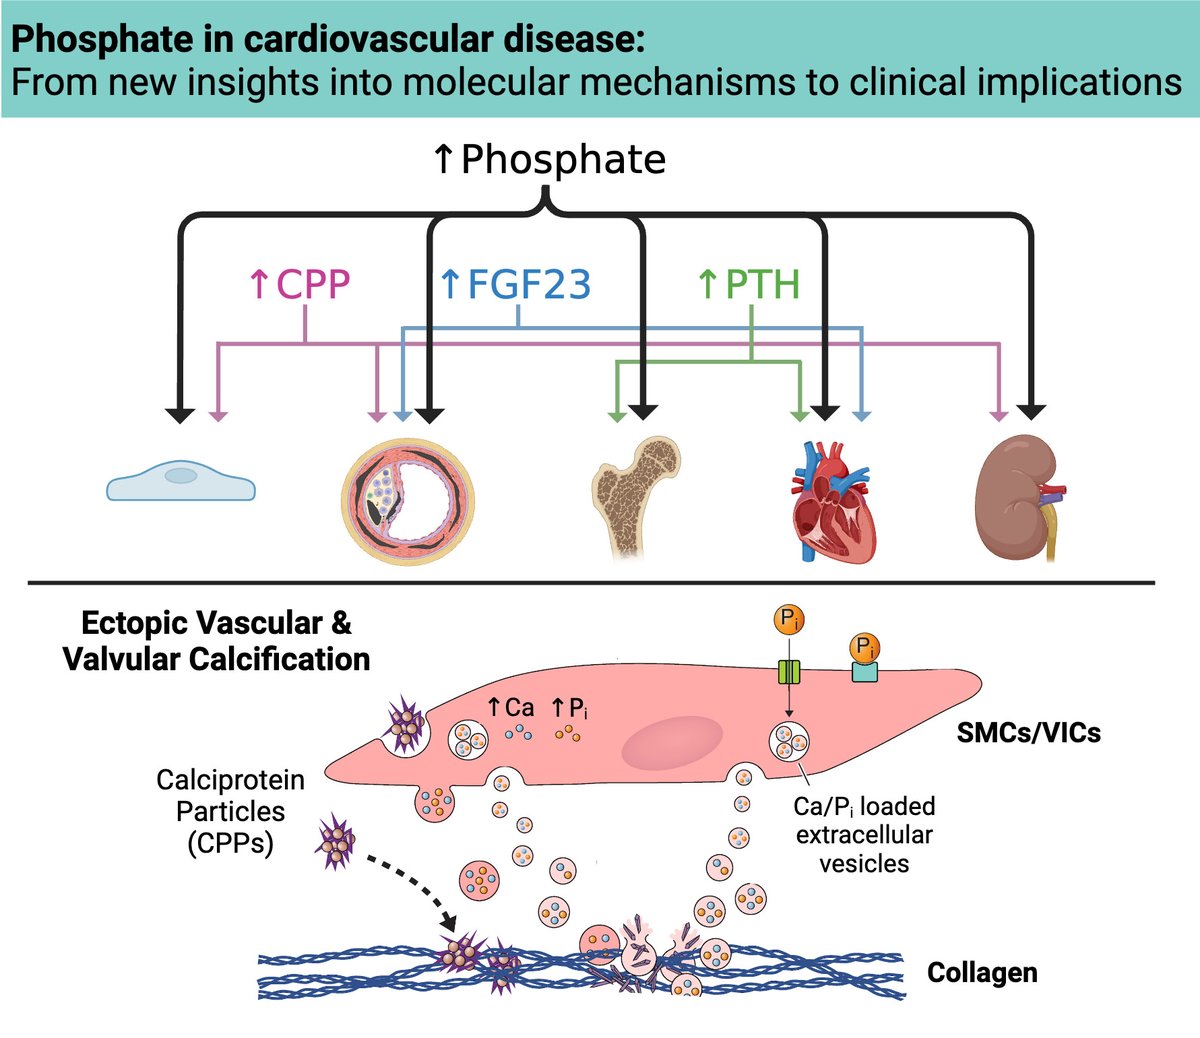 A review exploring advances in our understanding of phosphate (dys)regulation and #CVD impacts in both patients with #CKD and the general population @mandyturner_ @AikawaElena ahajrnls.org/3OjrIXv